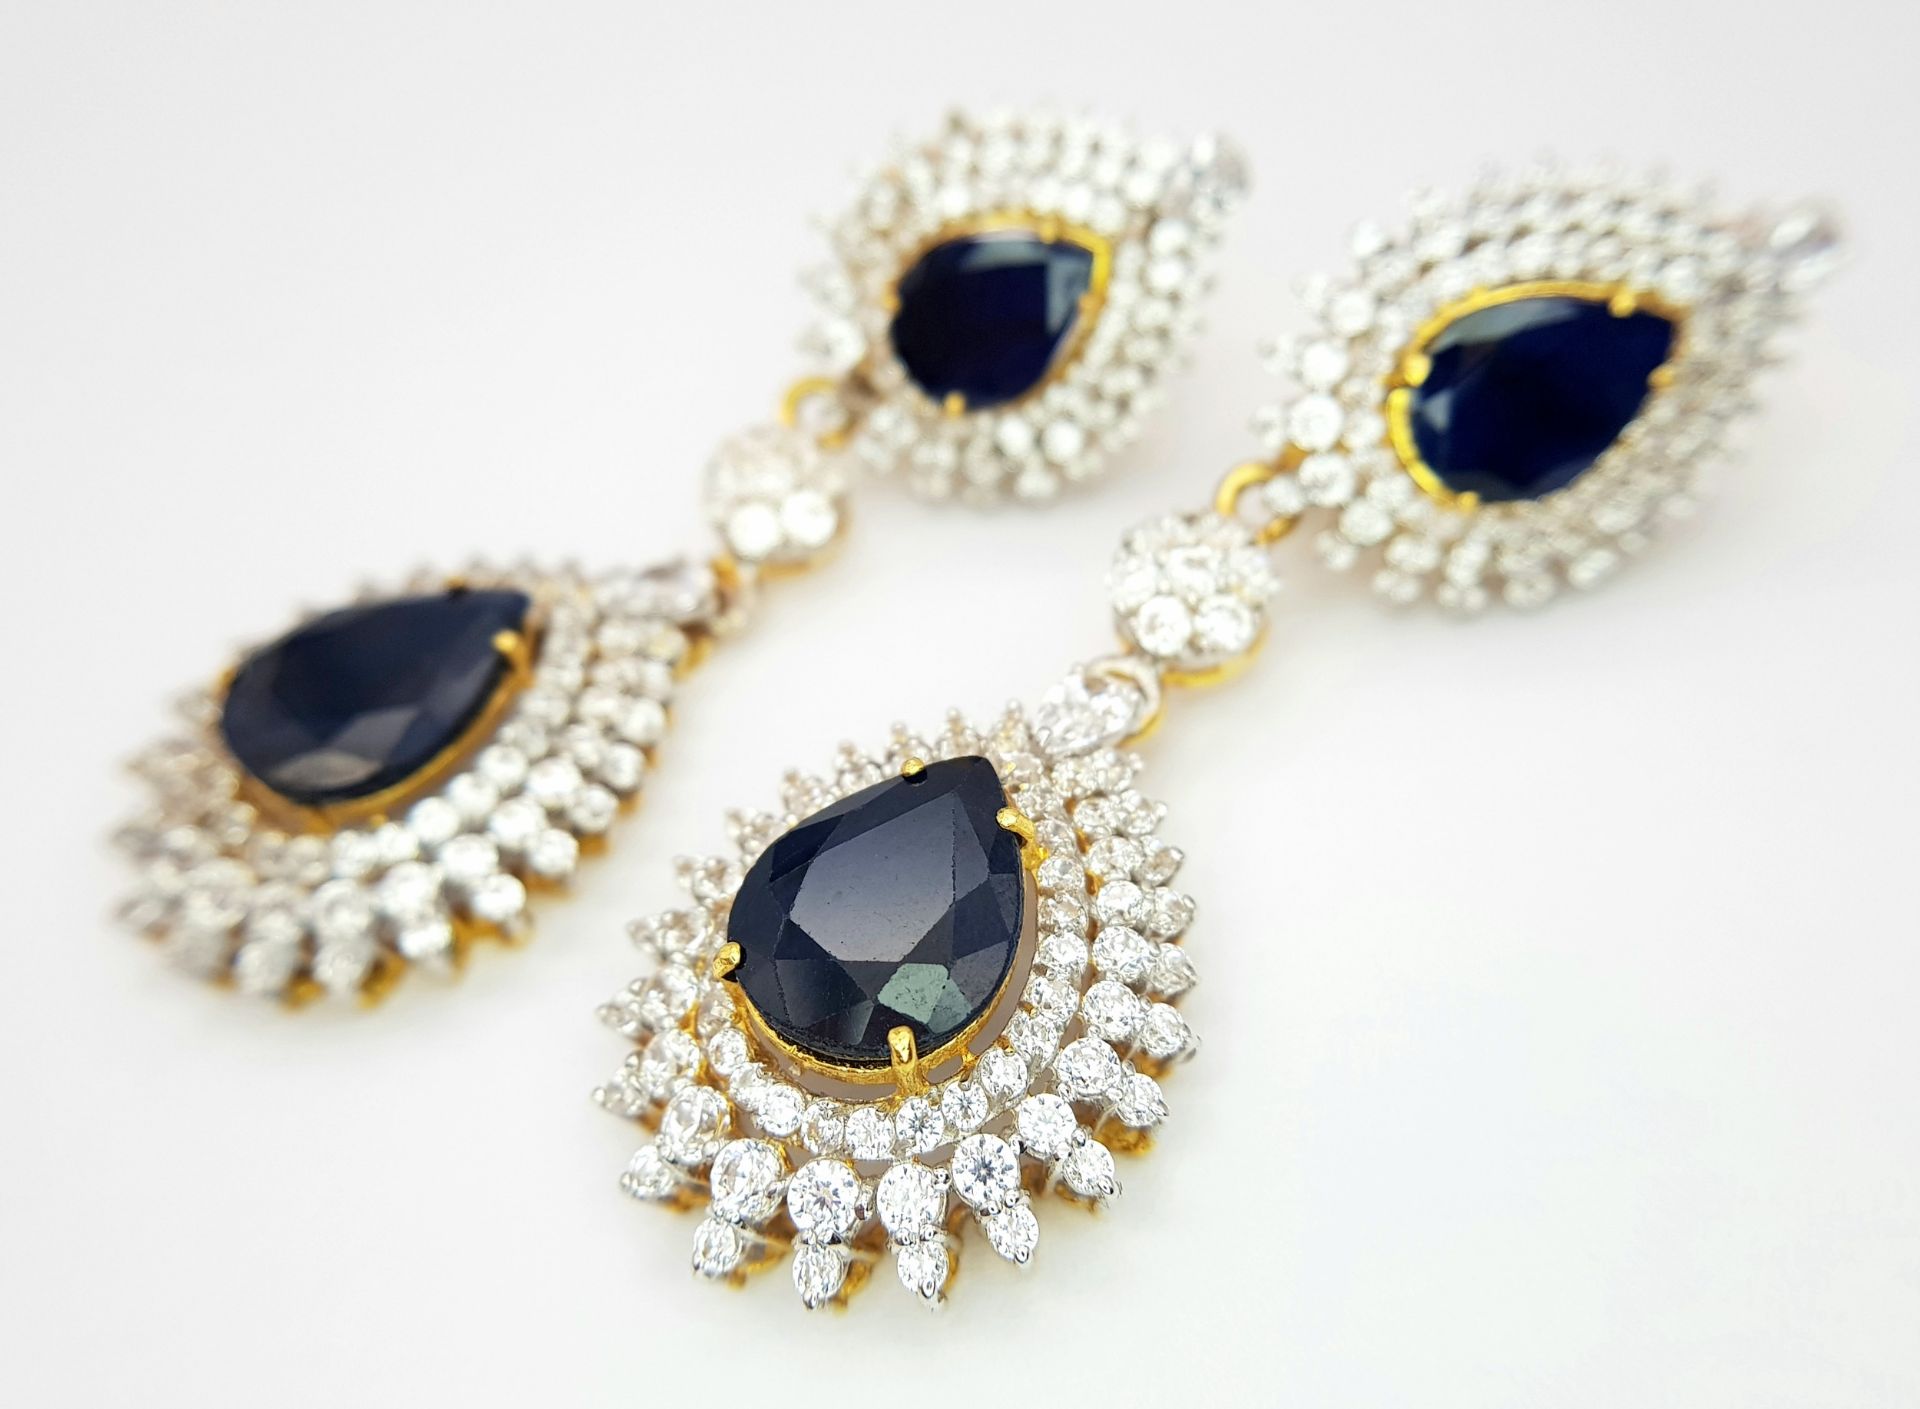 A Fabulous Jewellery Lot! A 21K Rich Yellow Gold Diamond and White Stone (one missing) Necklace with - Image 4 of 7